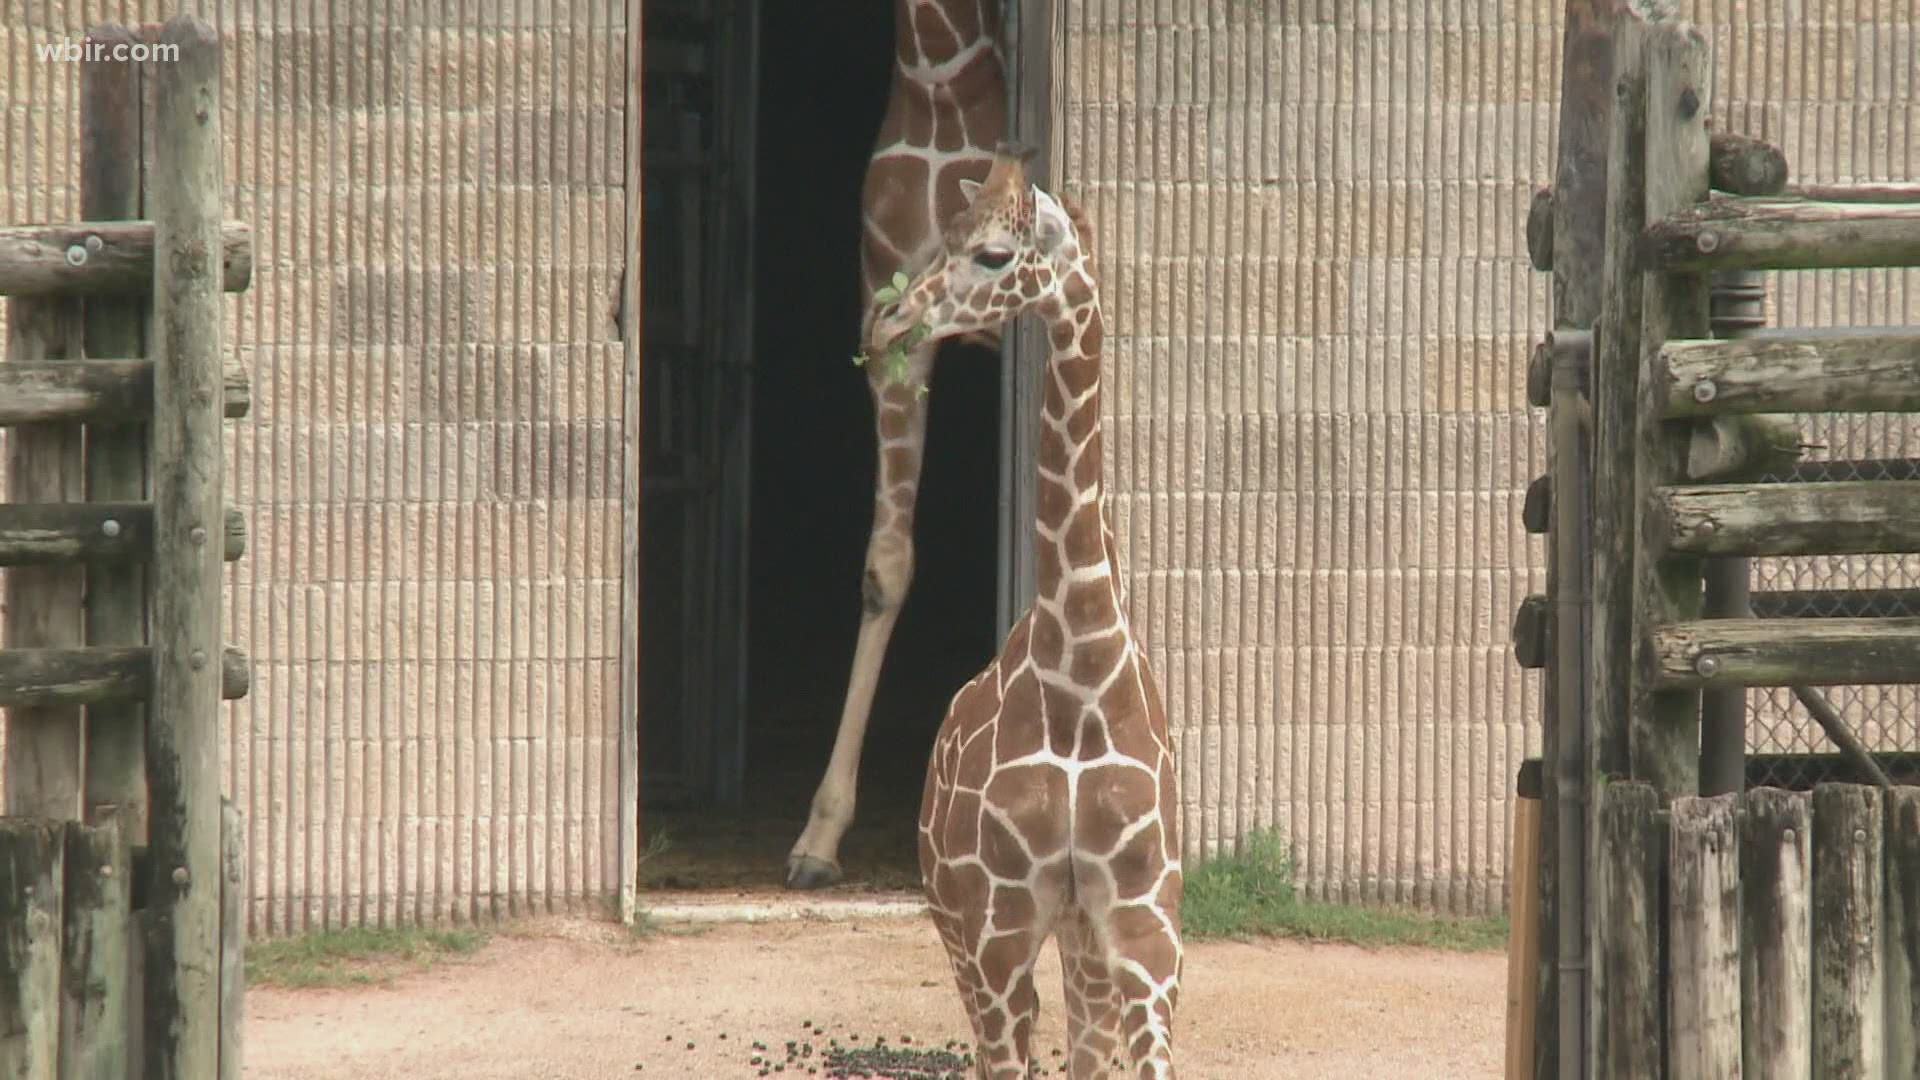 Zoo Knoxville said Bea is so unique because she was the first giraffe born at the zoo in 17 years.